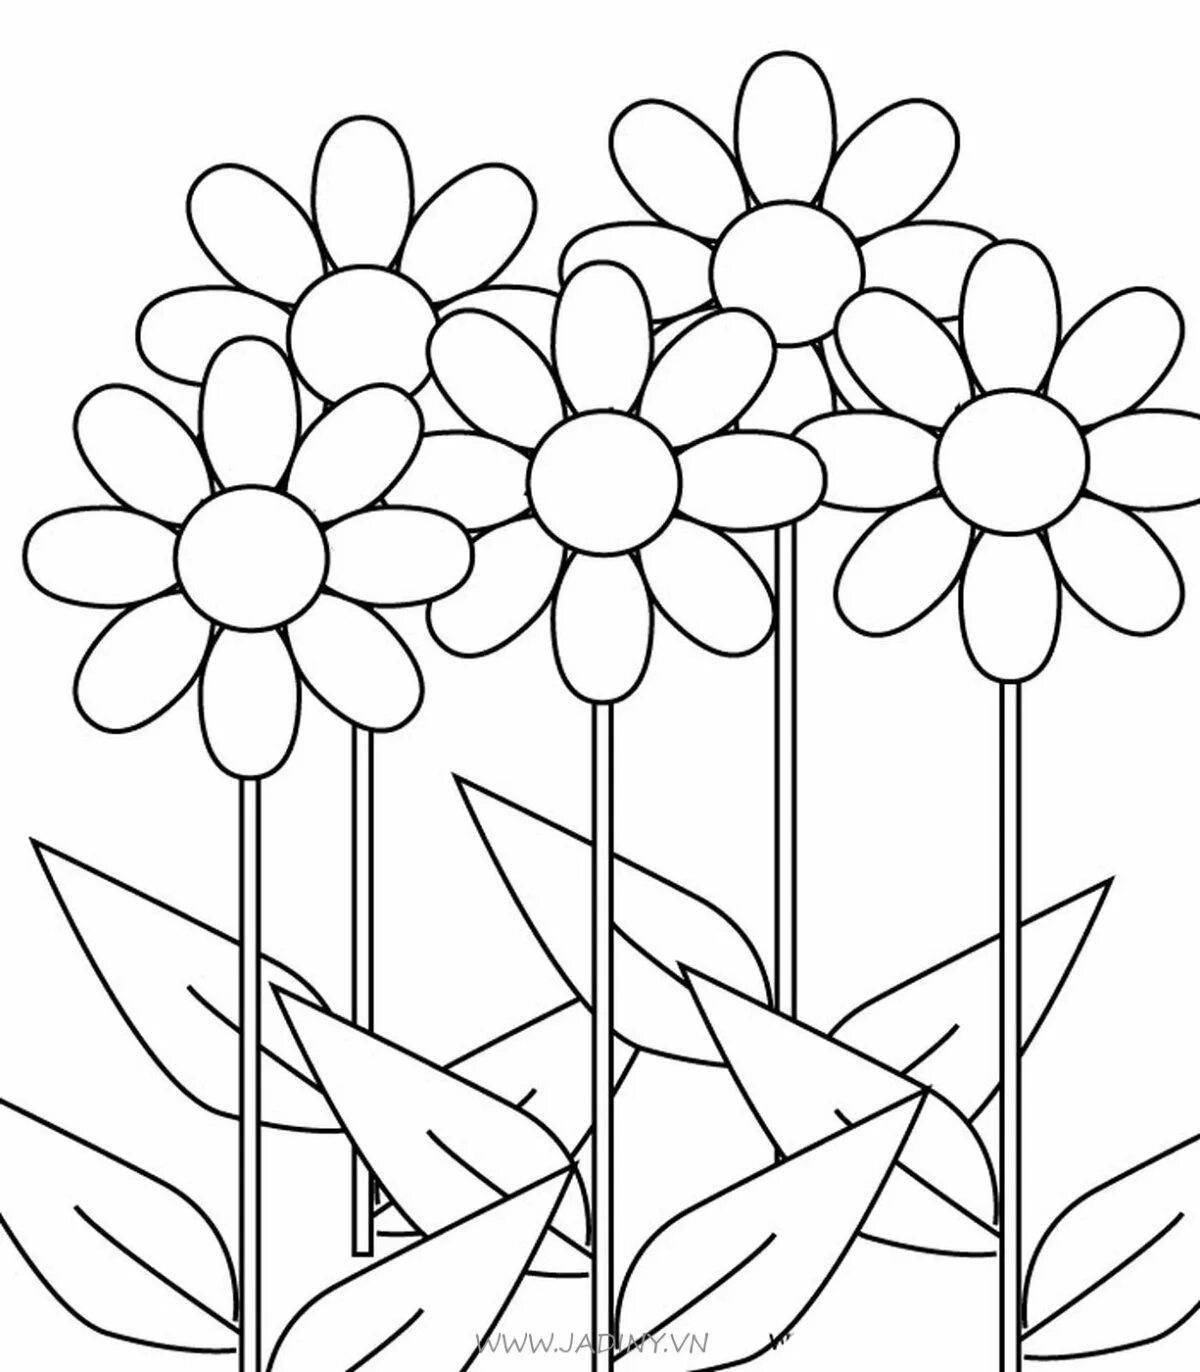 Funny wildflowers coloring for kids